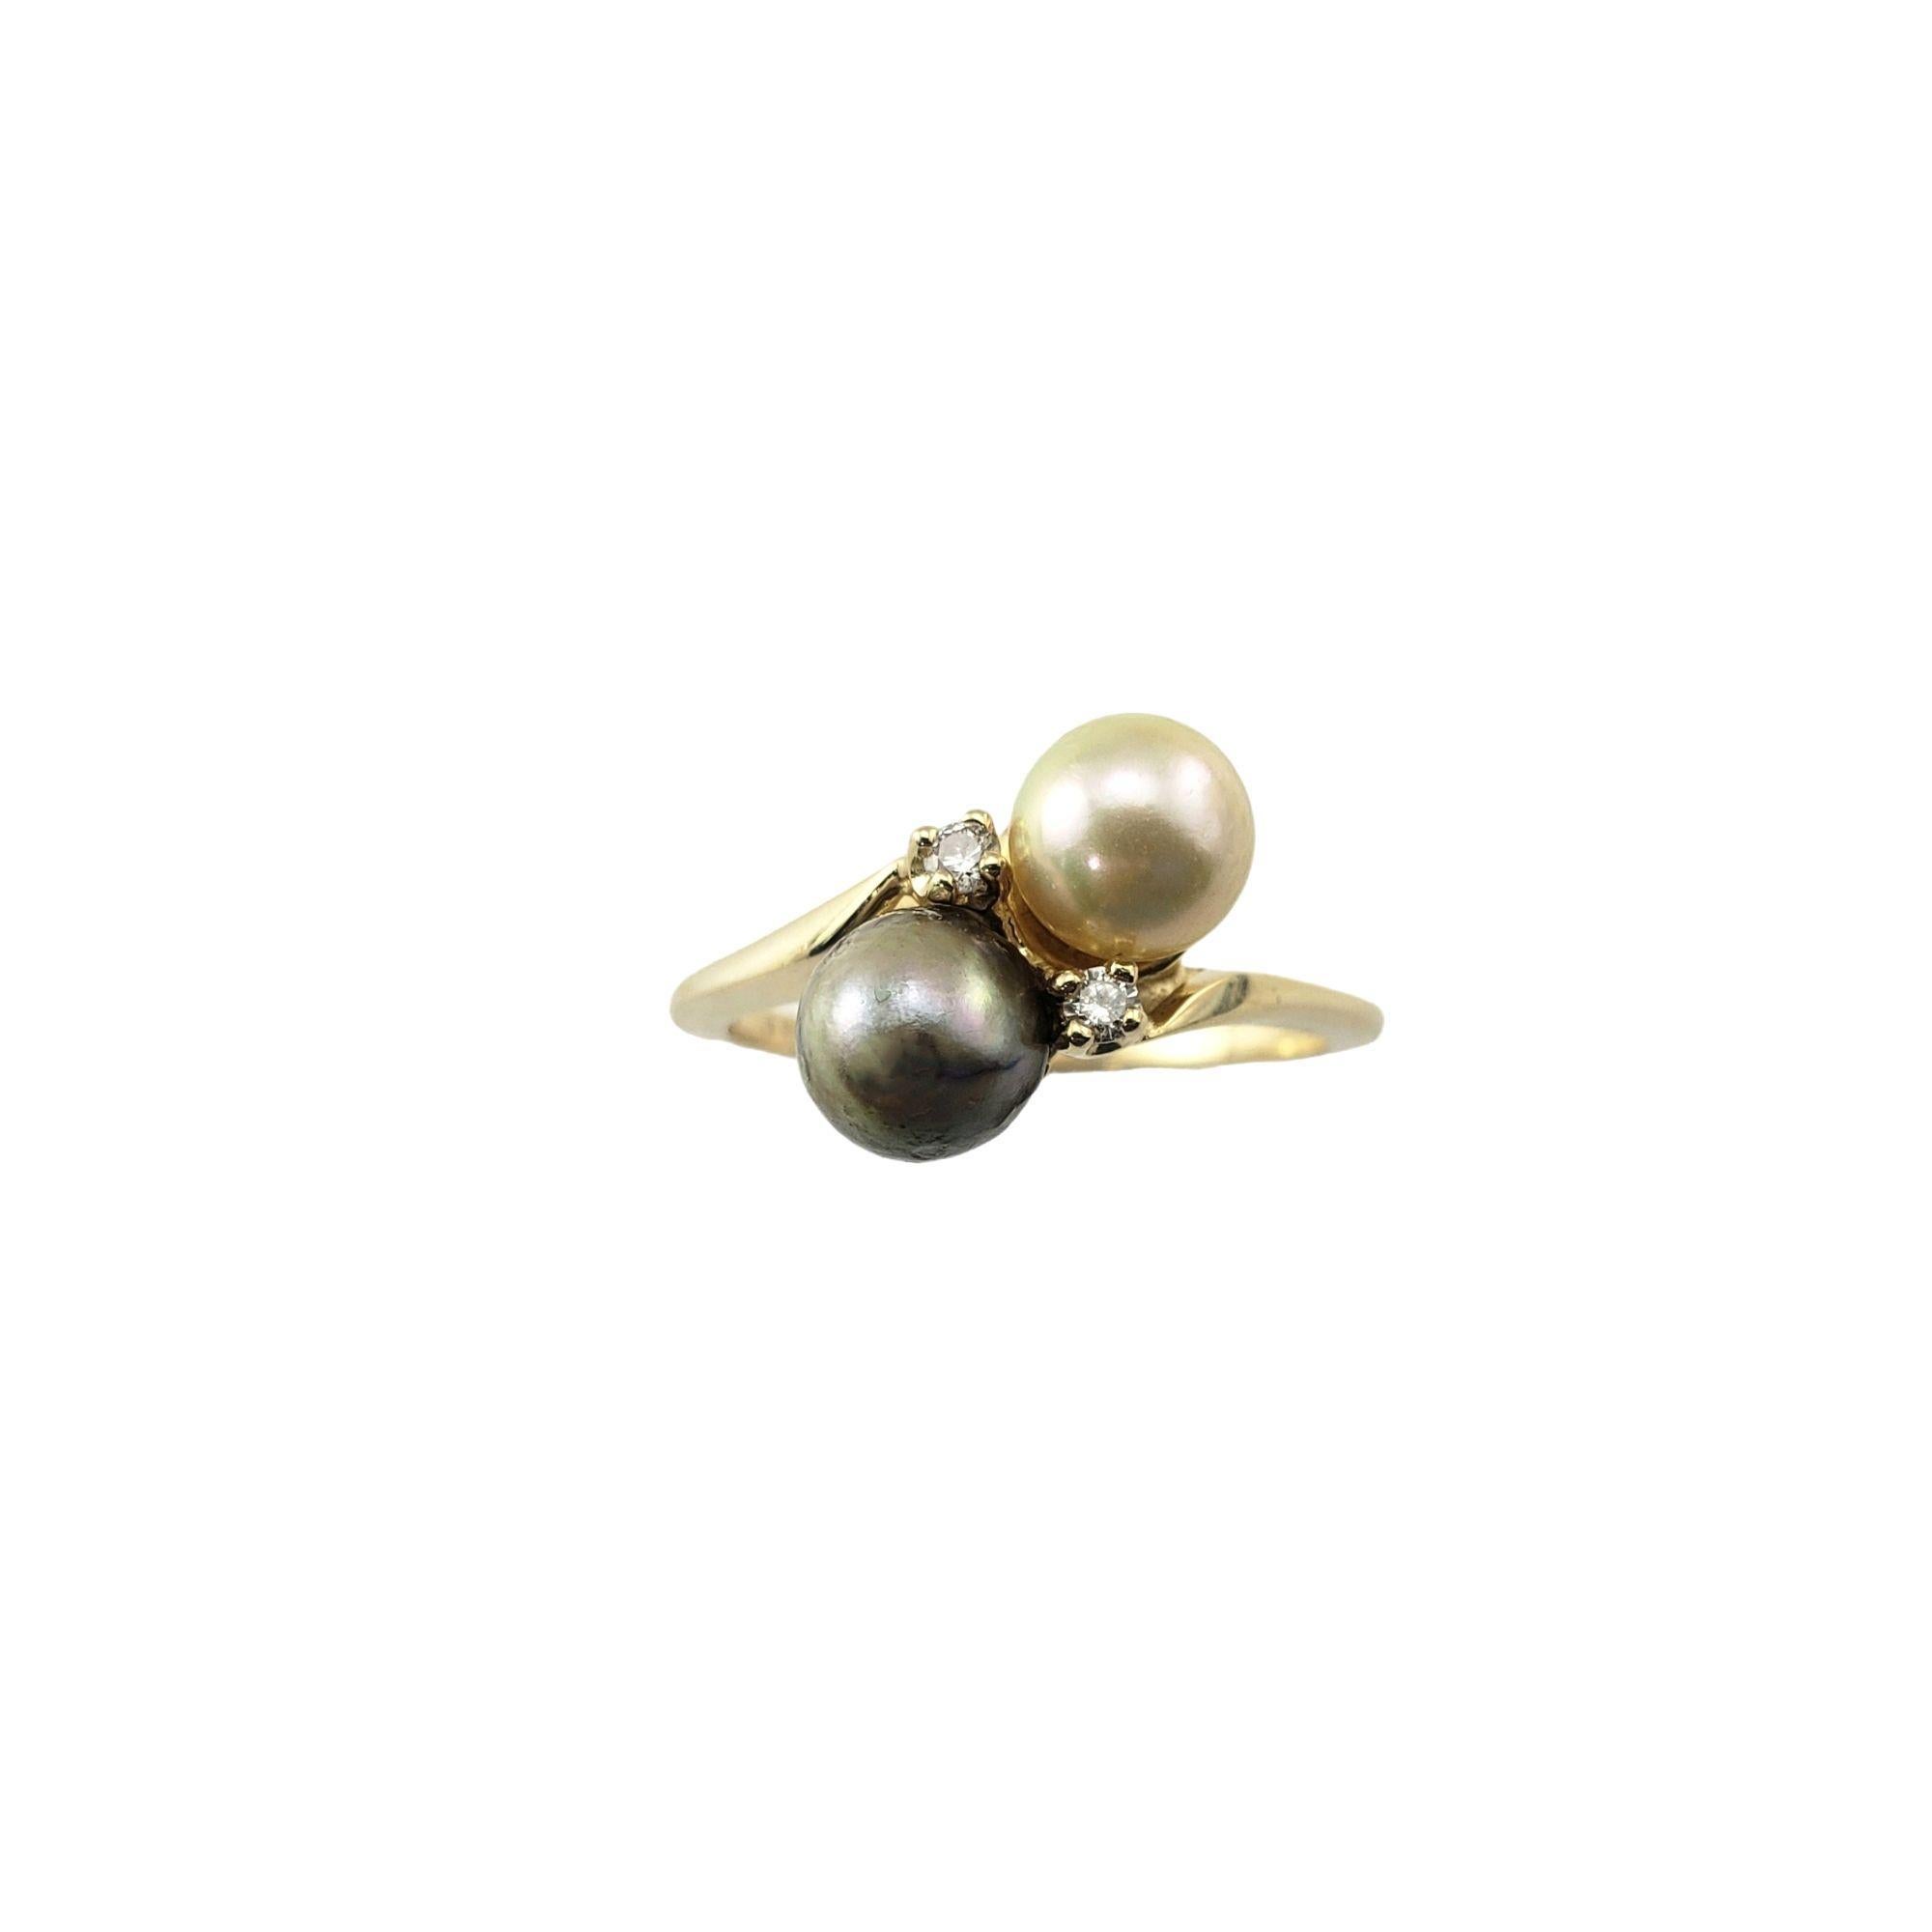 14 Karat Yellow Gold Pearl and Diamond Ring Size 8-

This elegant ring features one black pearl, one white pearl (6 mm each) and two round brilliant cut diamonds set in classic 14K yellow gold. 

Approximate total diamond weight: .06 ct.

Diamond